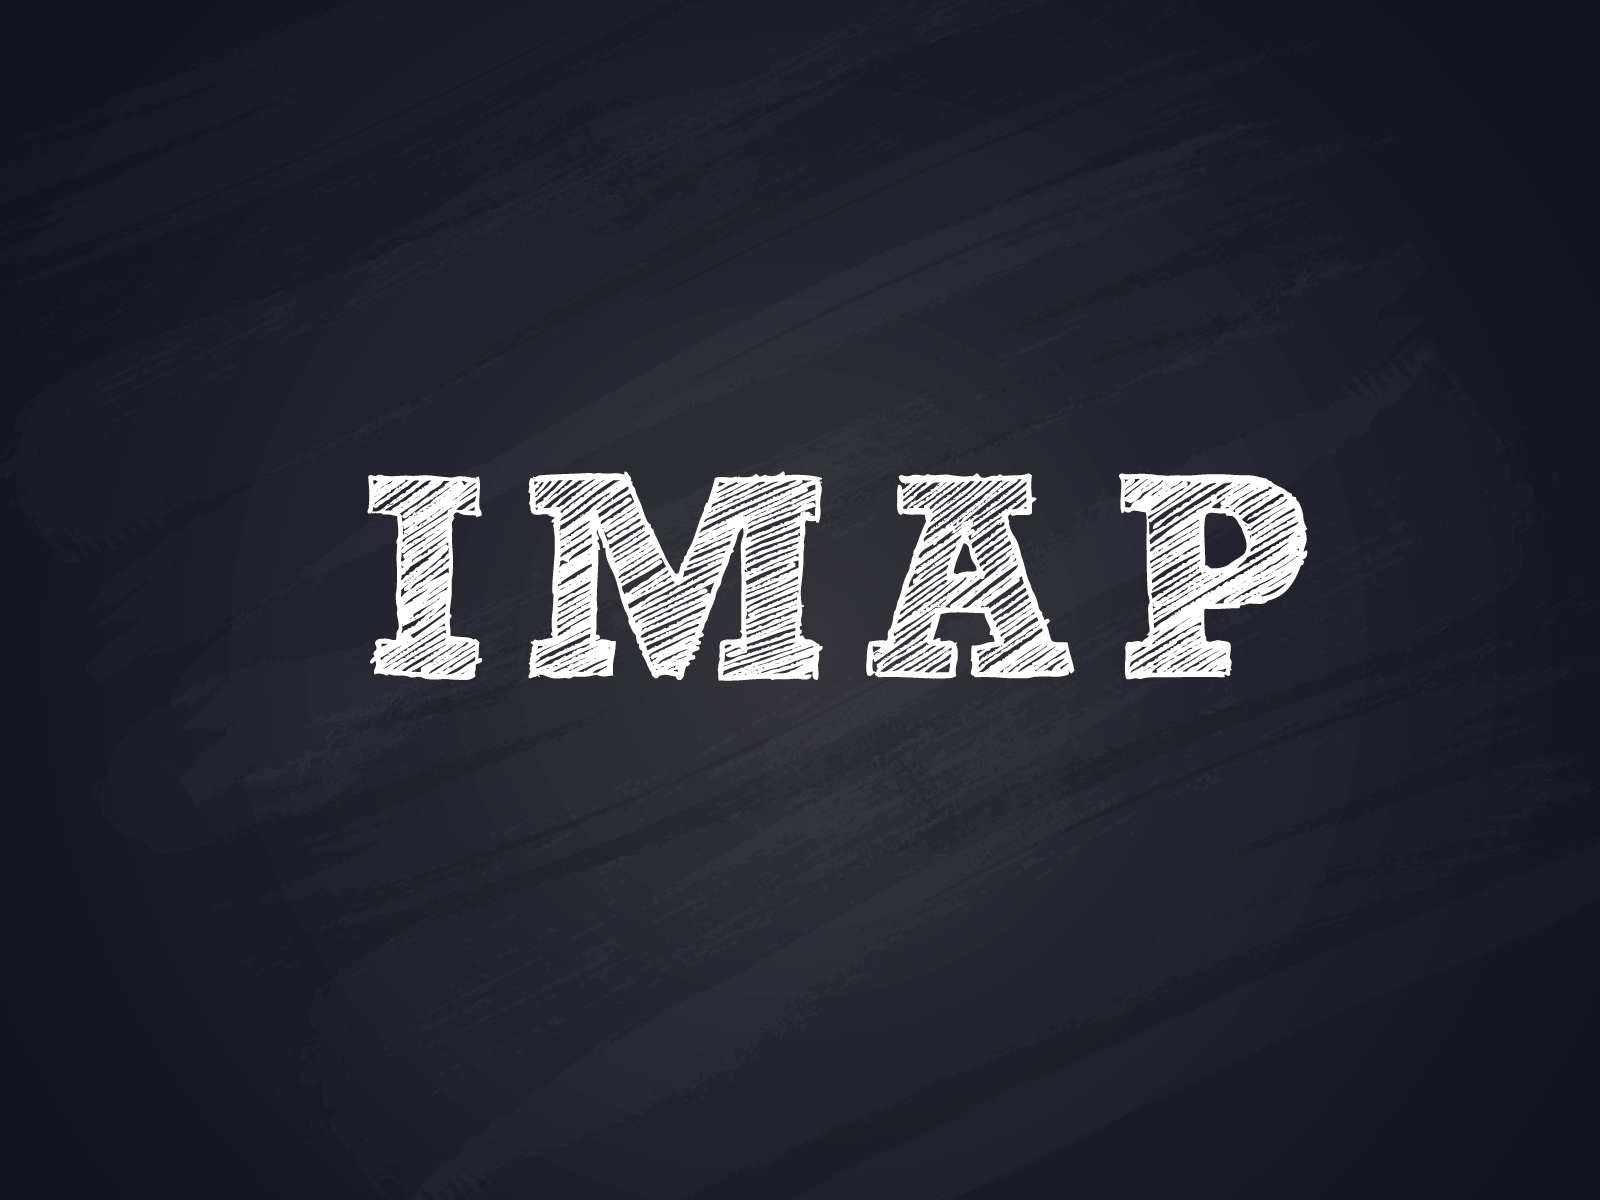 Can IMAP send email?